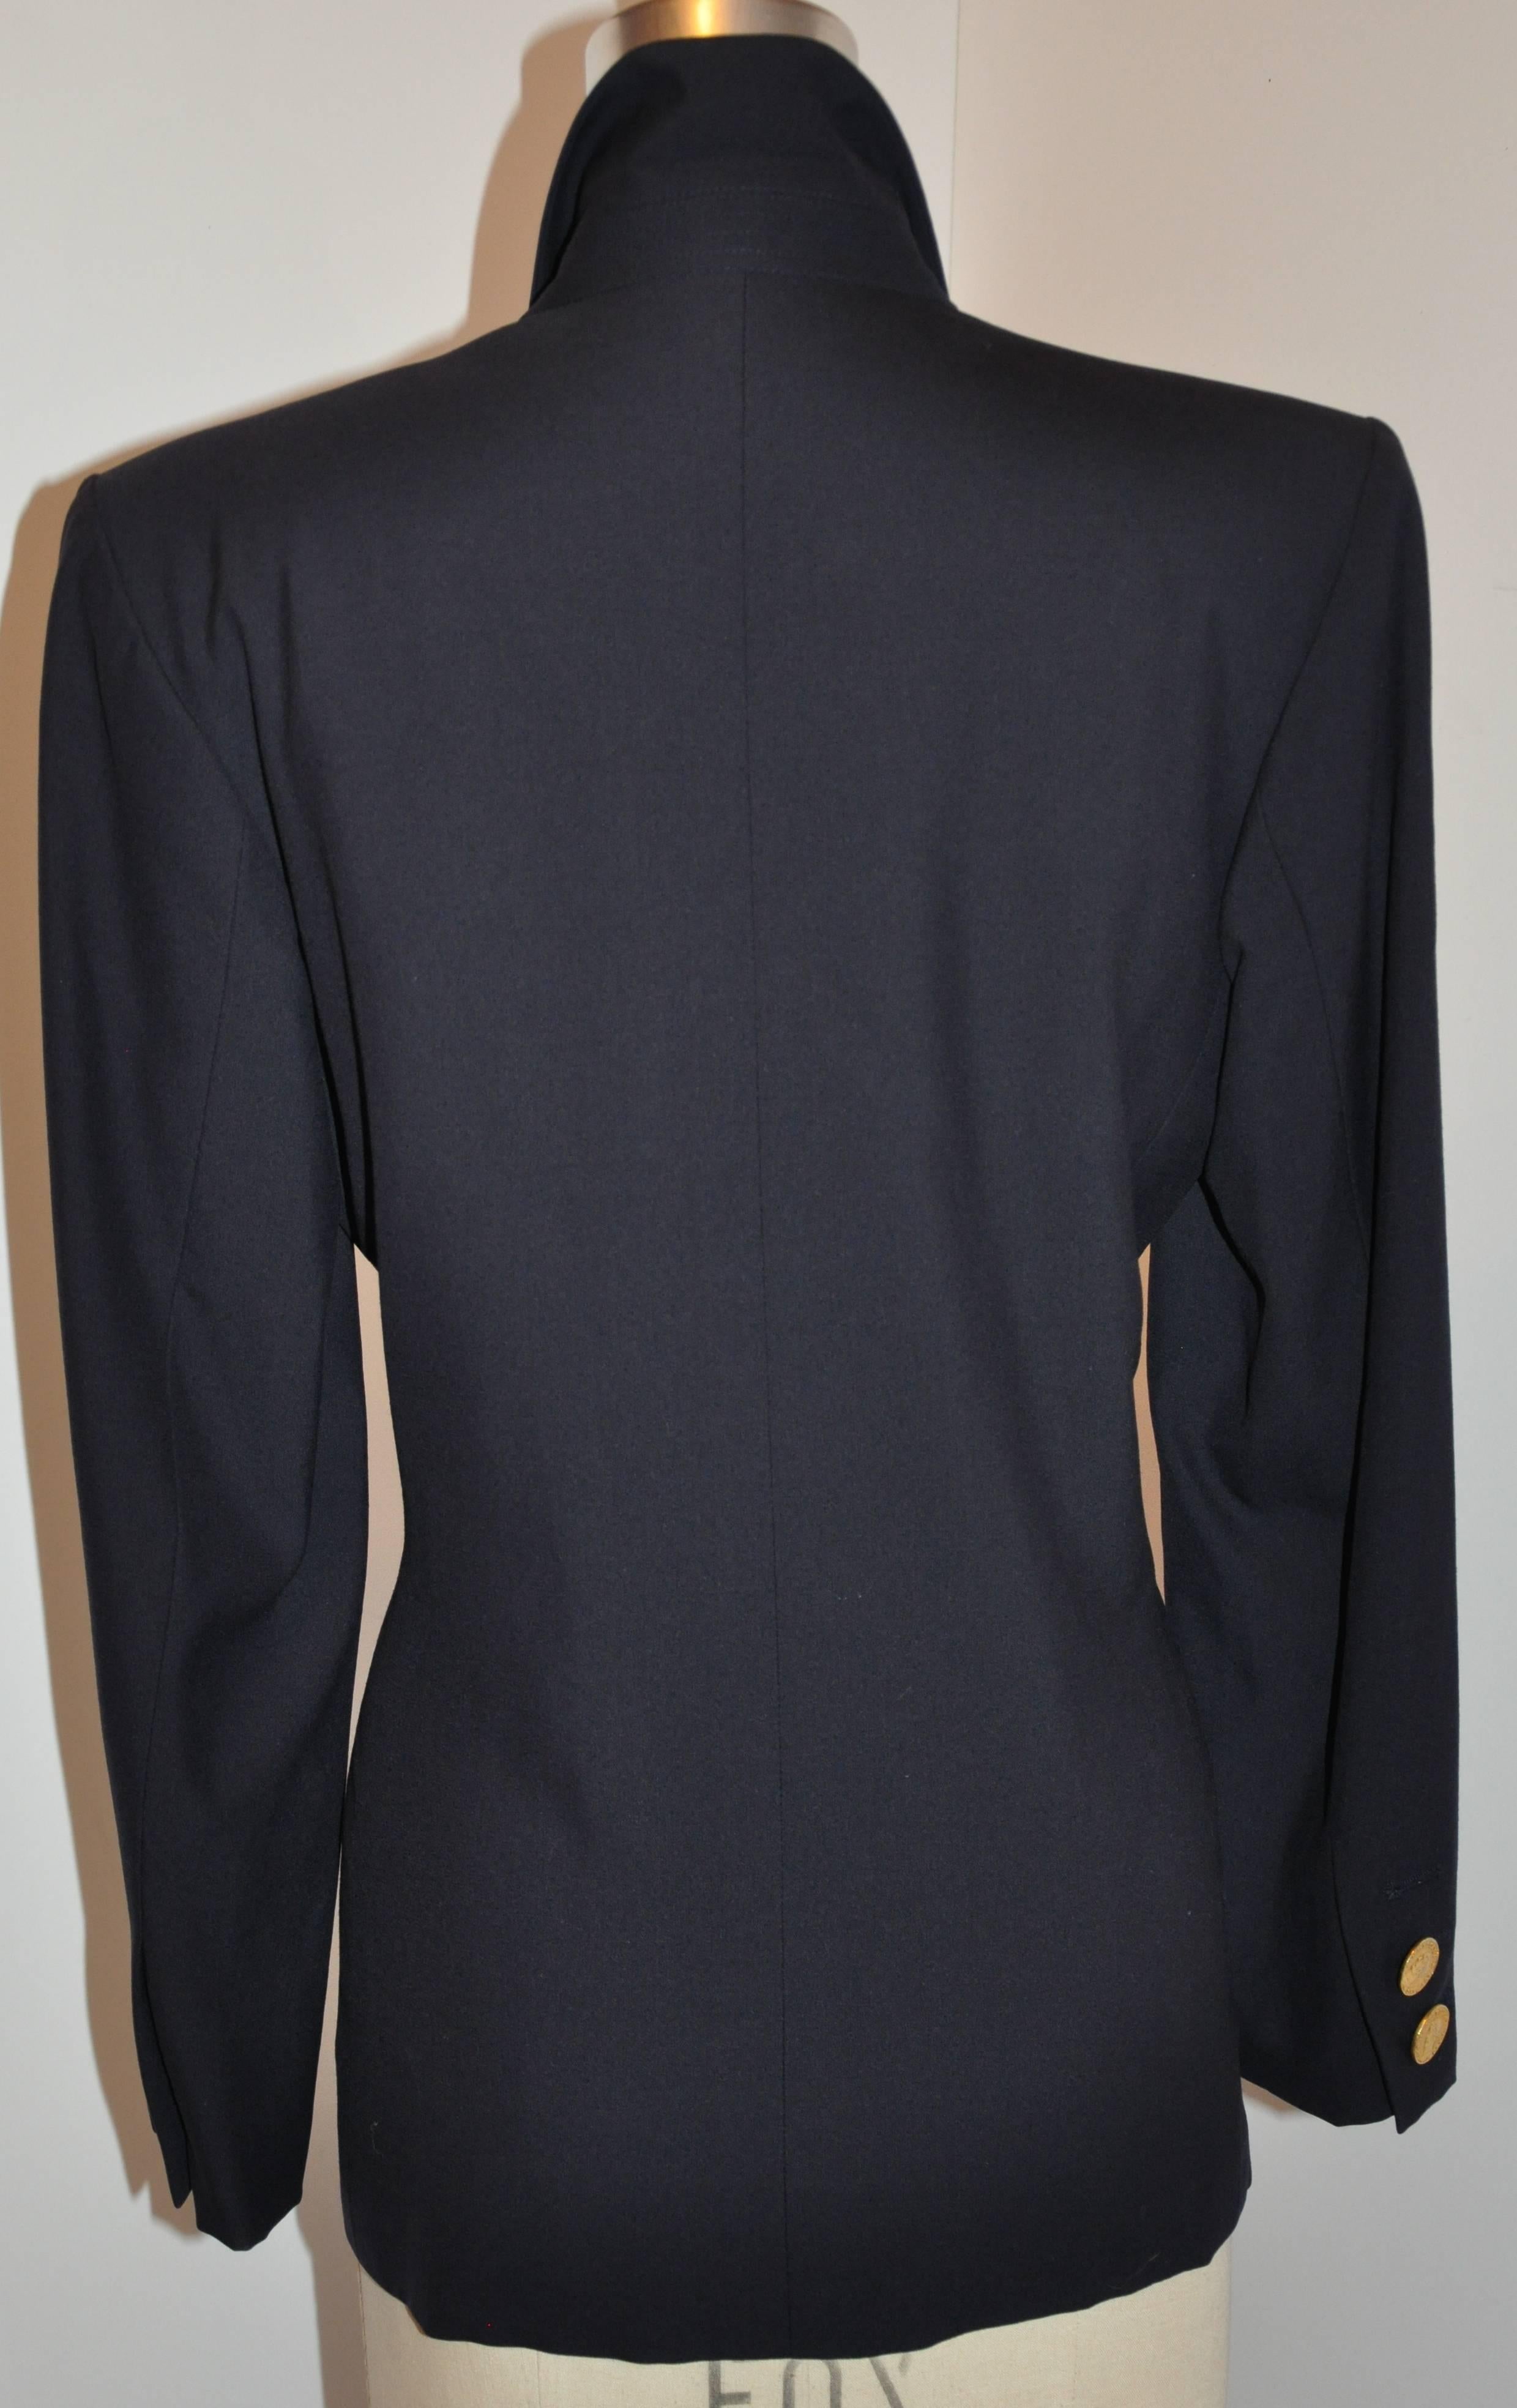           Yves Saint Laurent rive gauche signature navy double-breasted blazer is accented with detailed gold hardware 